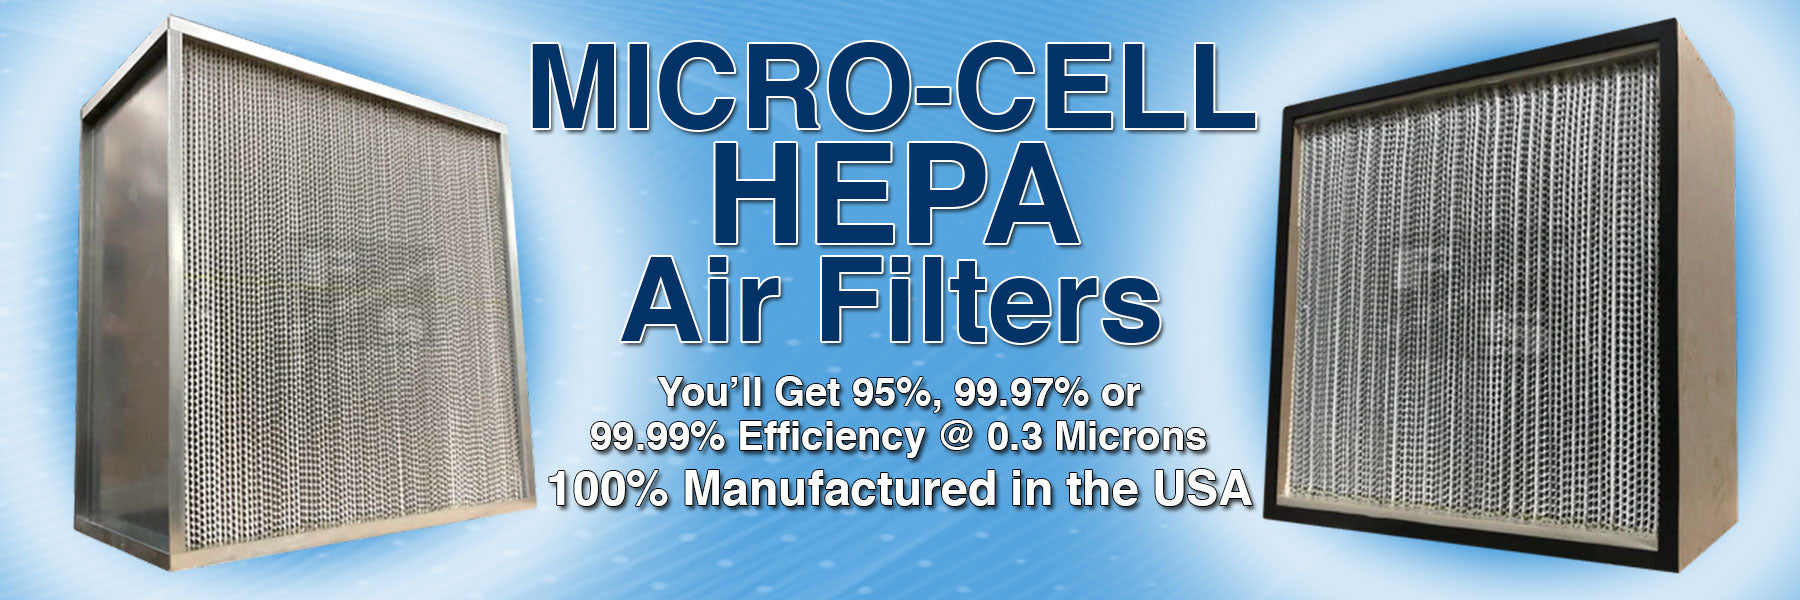 Micro-cell HEPA Air Filters